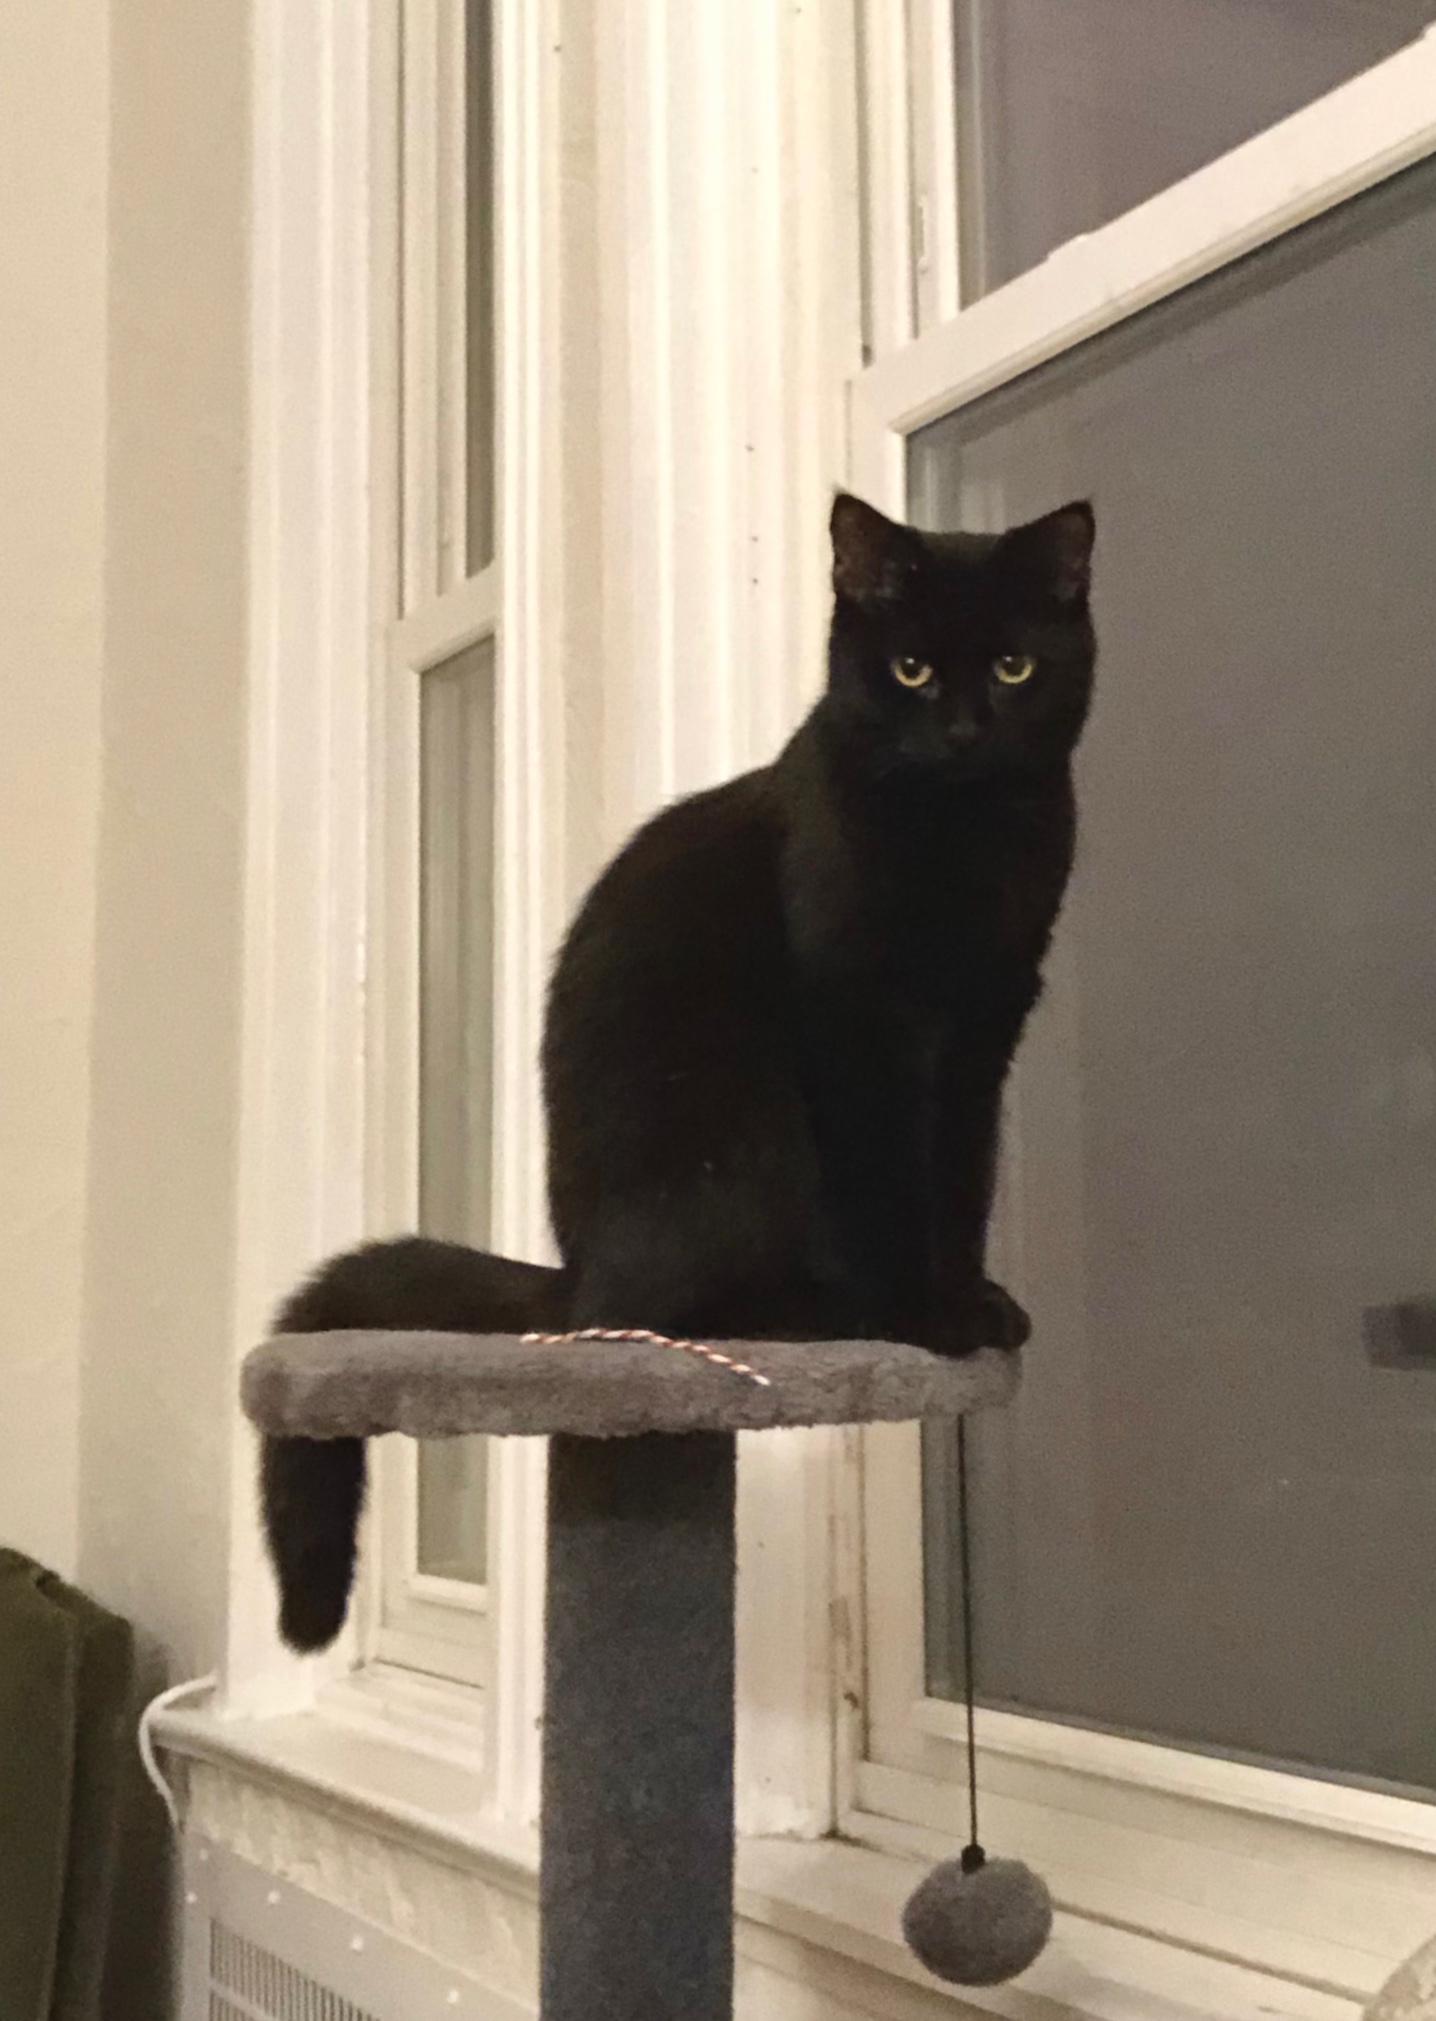 A black cat named Pinto sitting on top of her cat tree, looking directly and calmly at you with big round eyes.